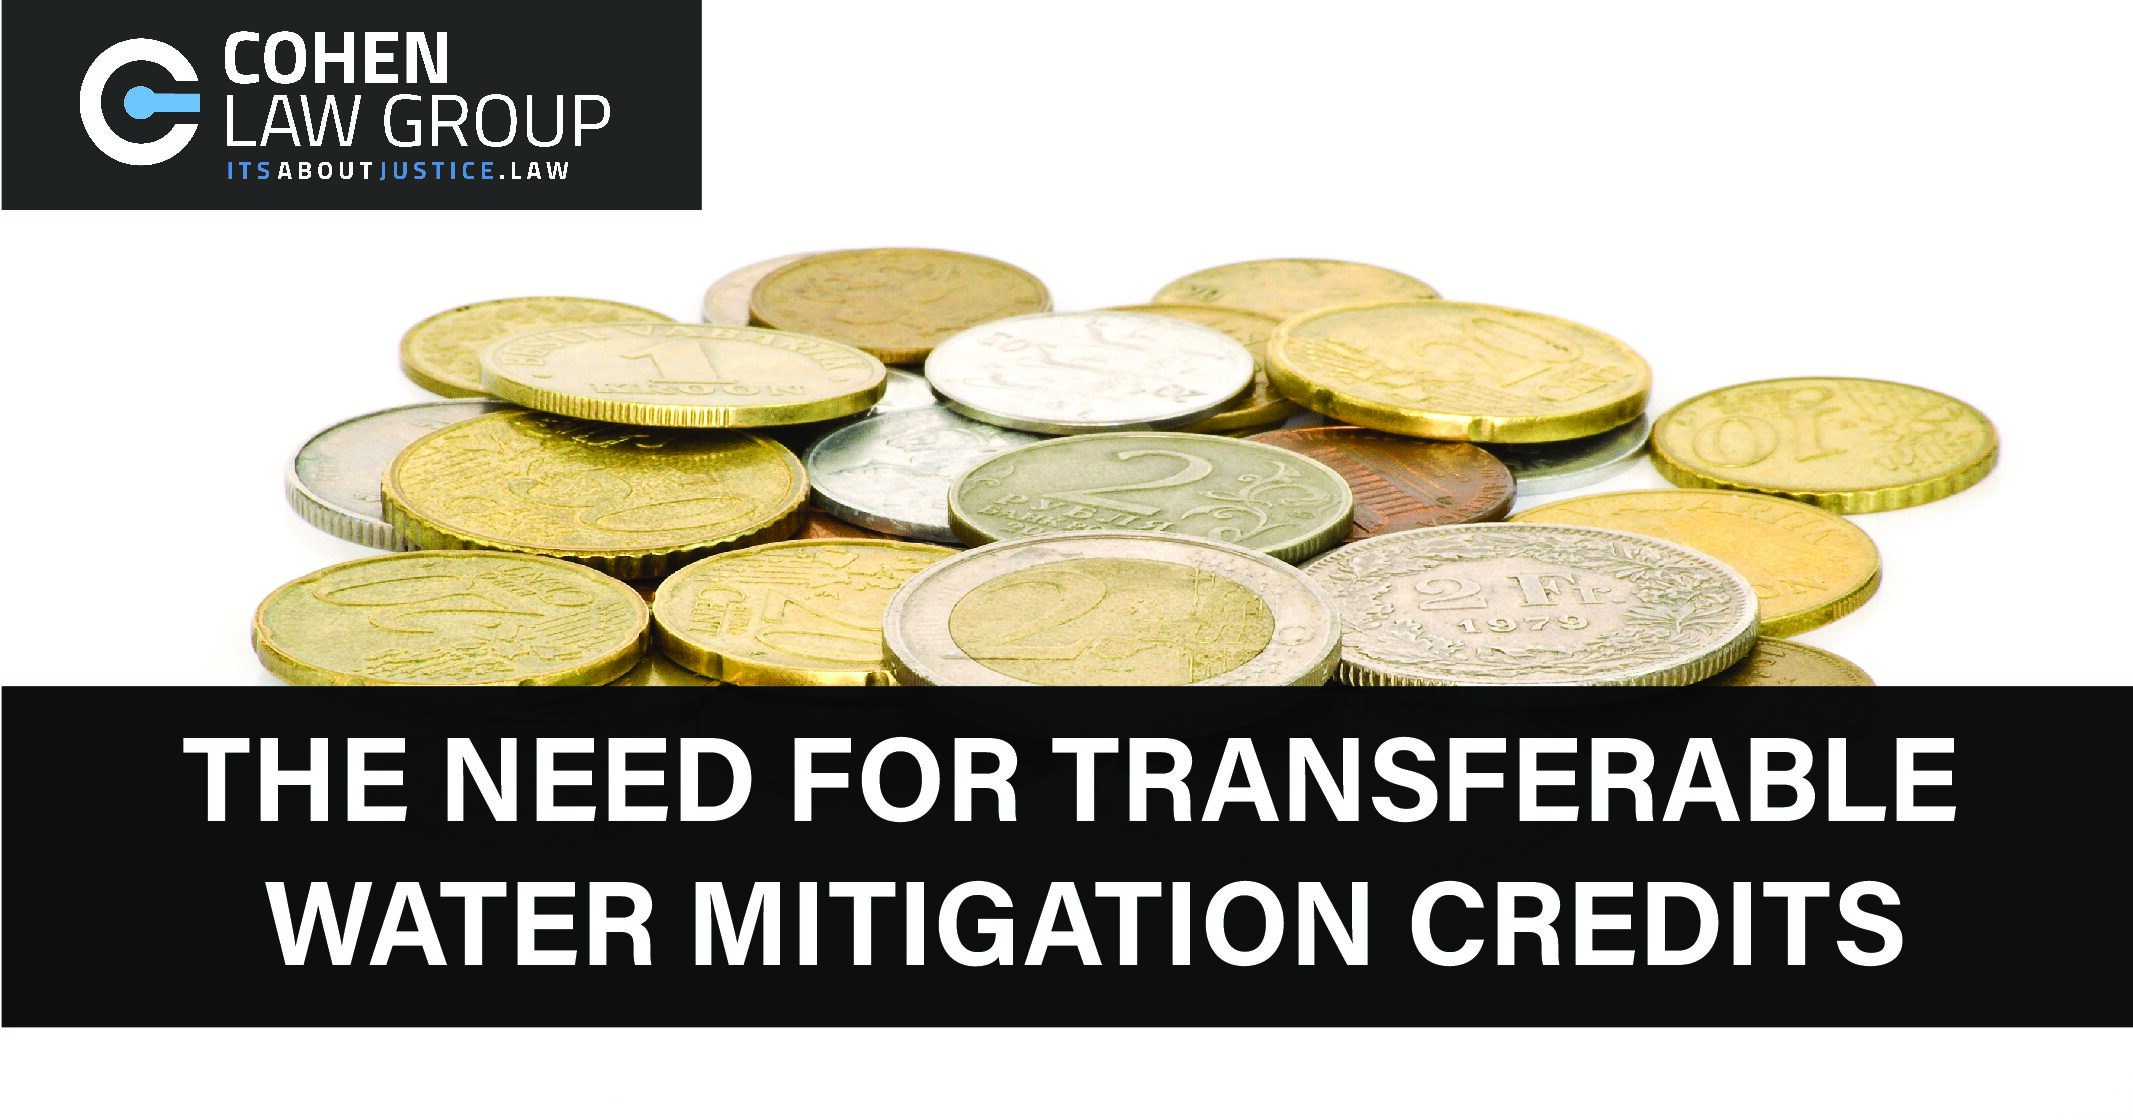 The Need for Transferable Water Mitigation Credits